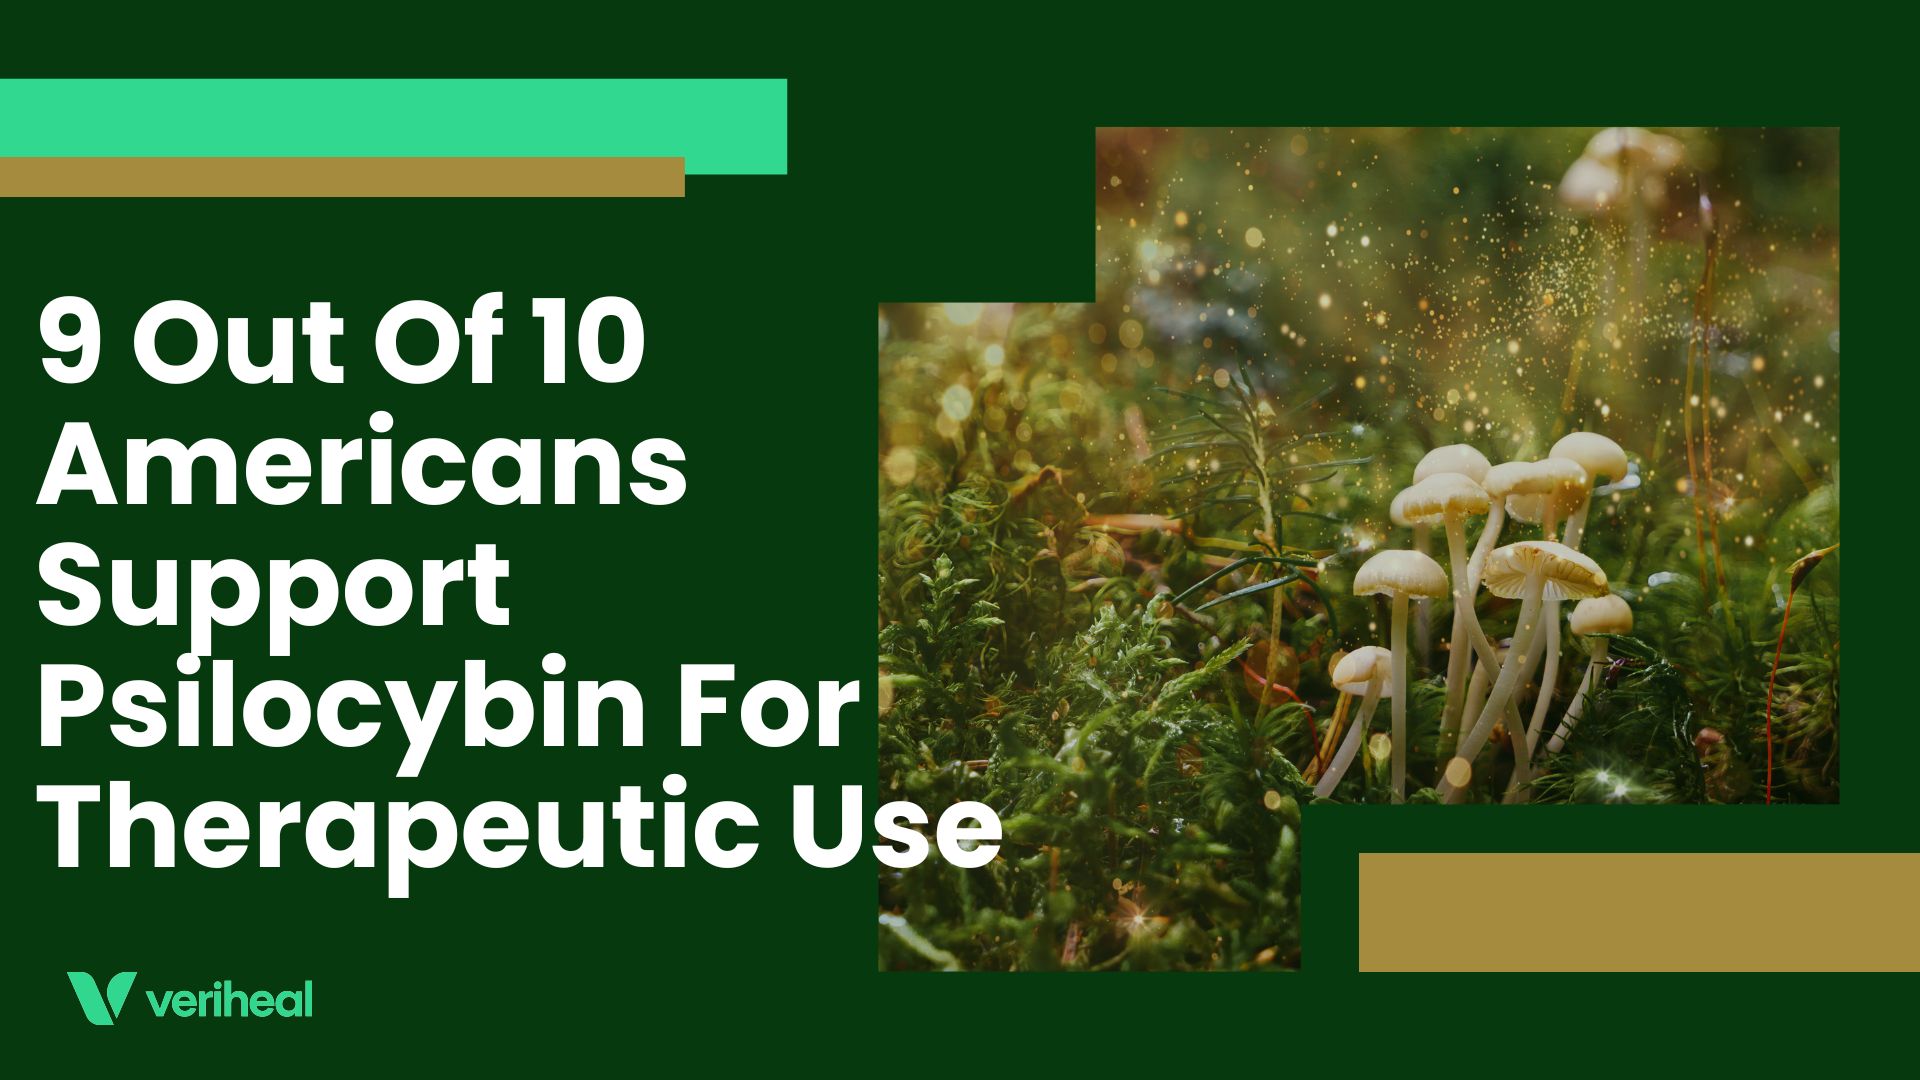 9 Out Of 10 Americans Support Psilocybin For Therapeutic Use